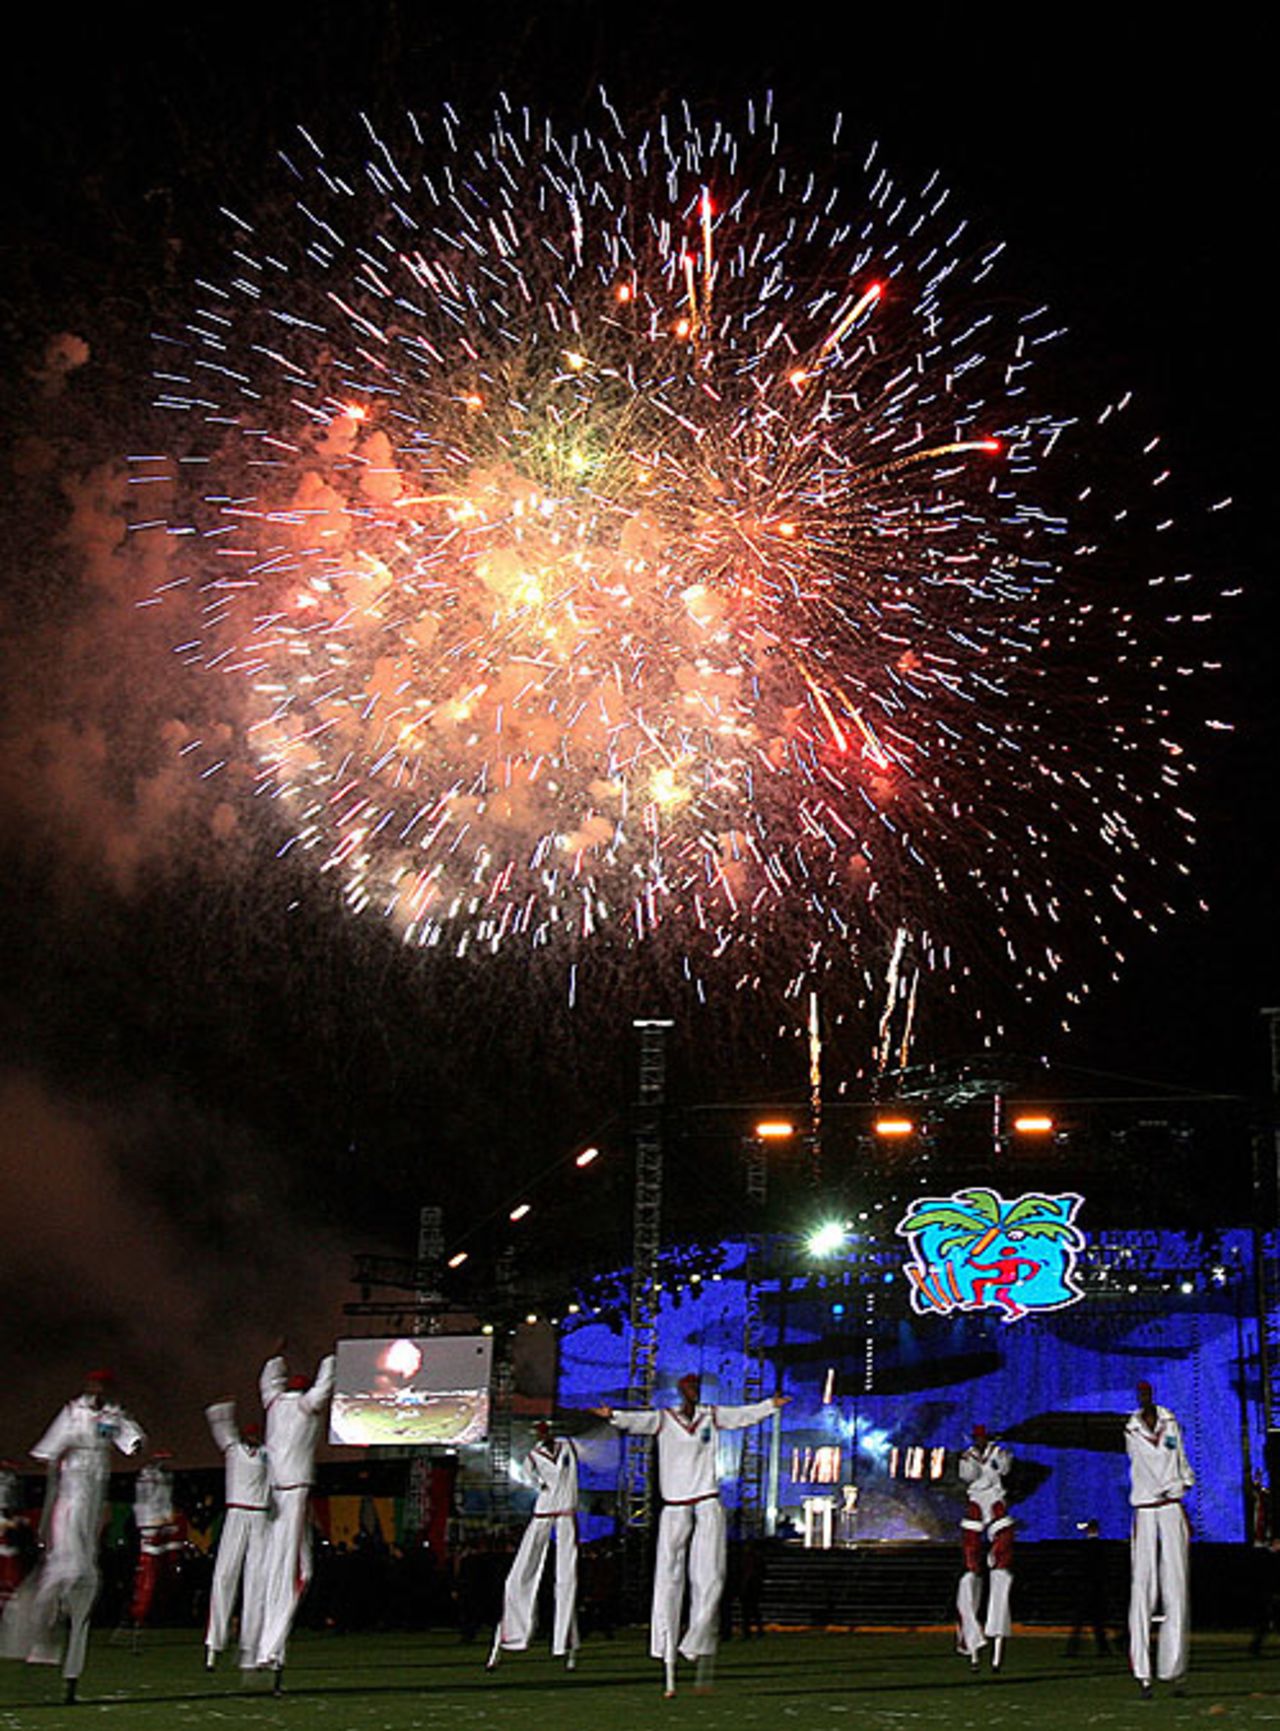 Performers dance as fireworks illuminate the night sky during the opening ceremony of the 2007 World Cup, Trelawny, March 11, 2007